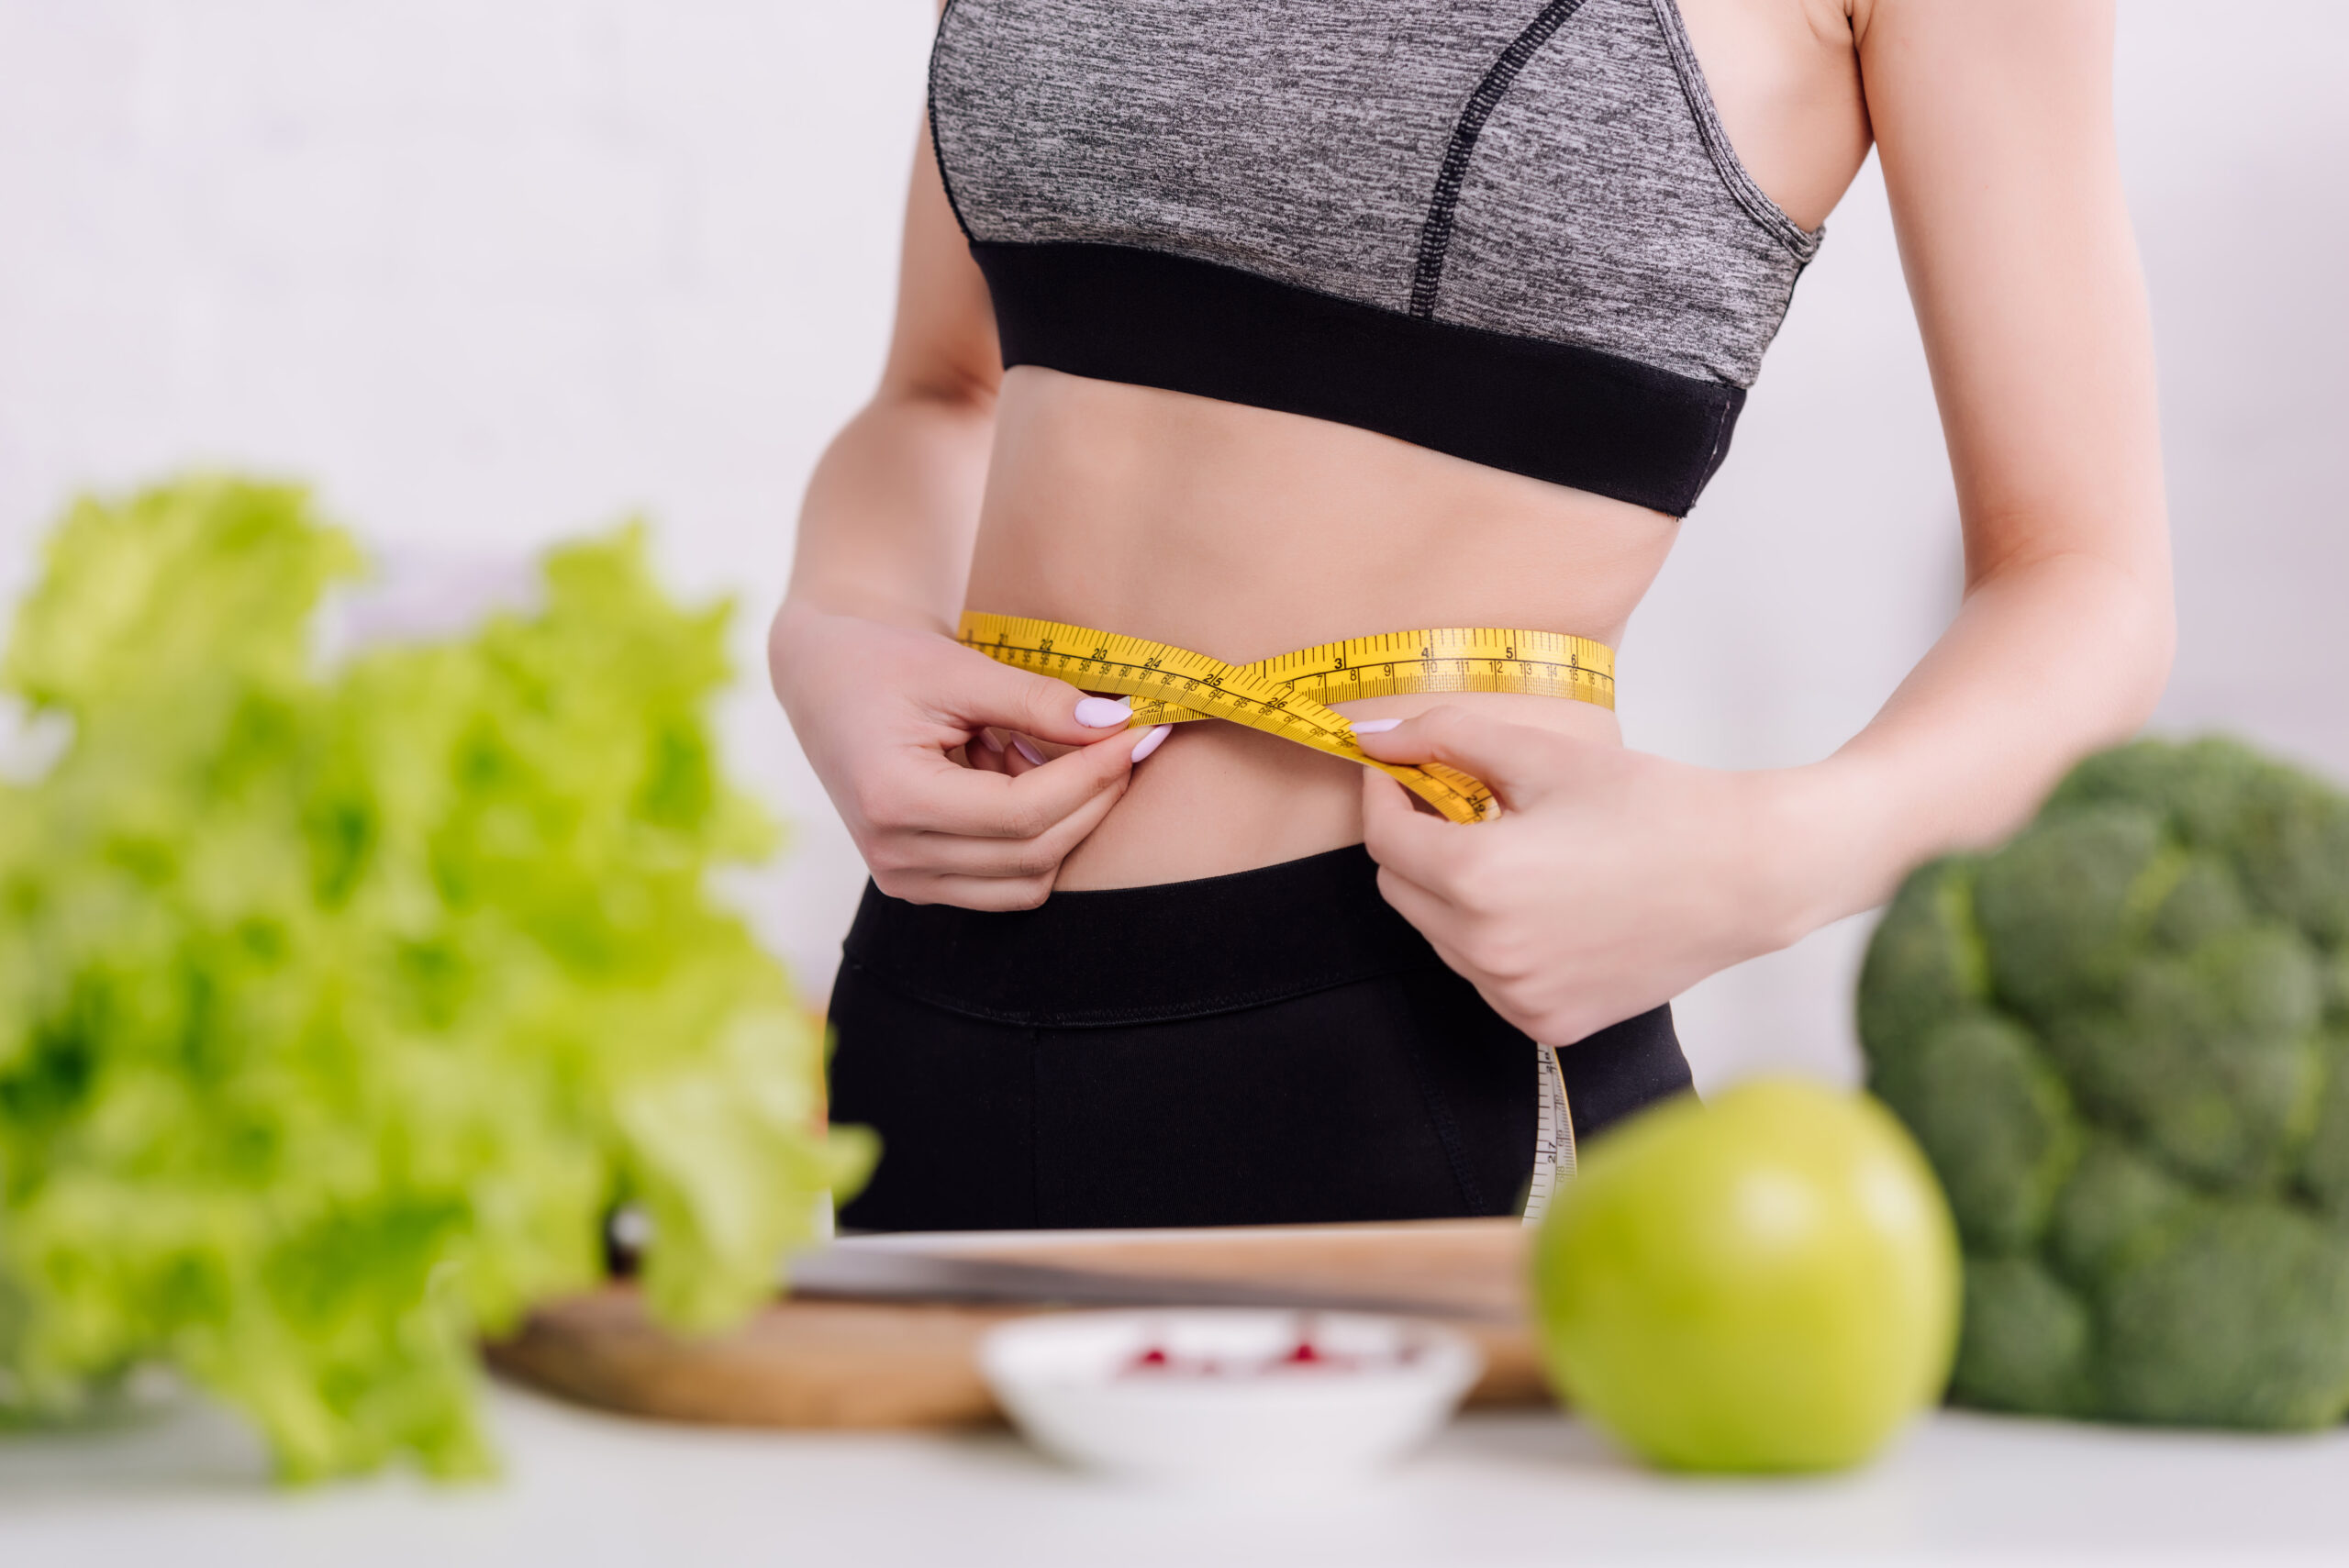 Explore Cheap Wegovy Online to Achieve Weight Loss on a Budget